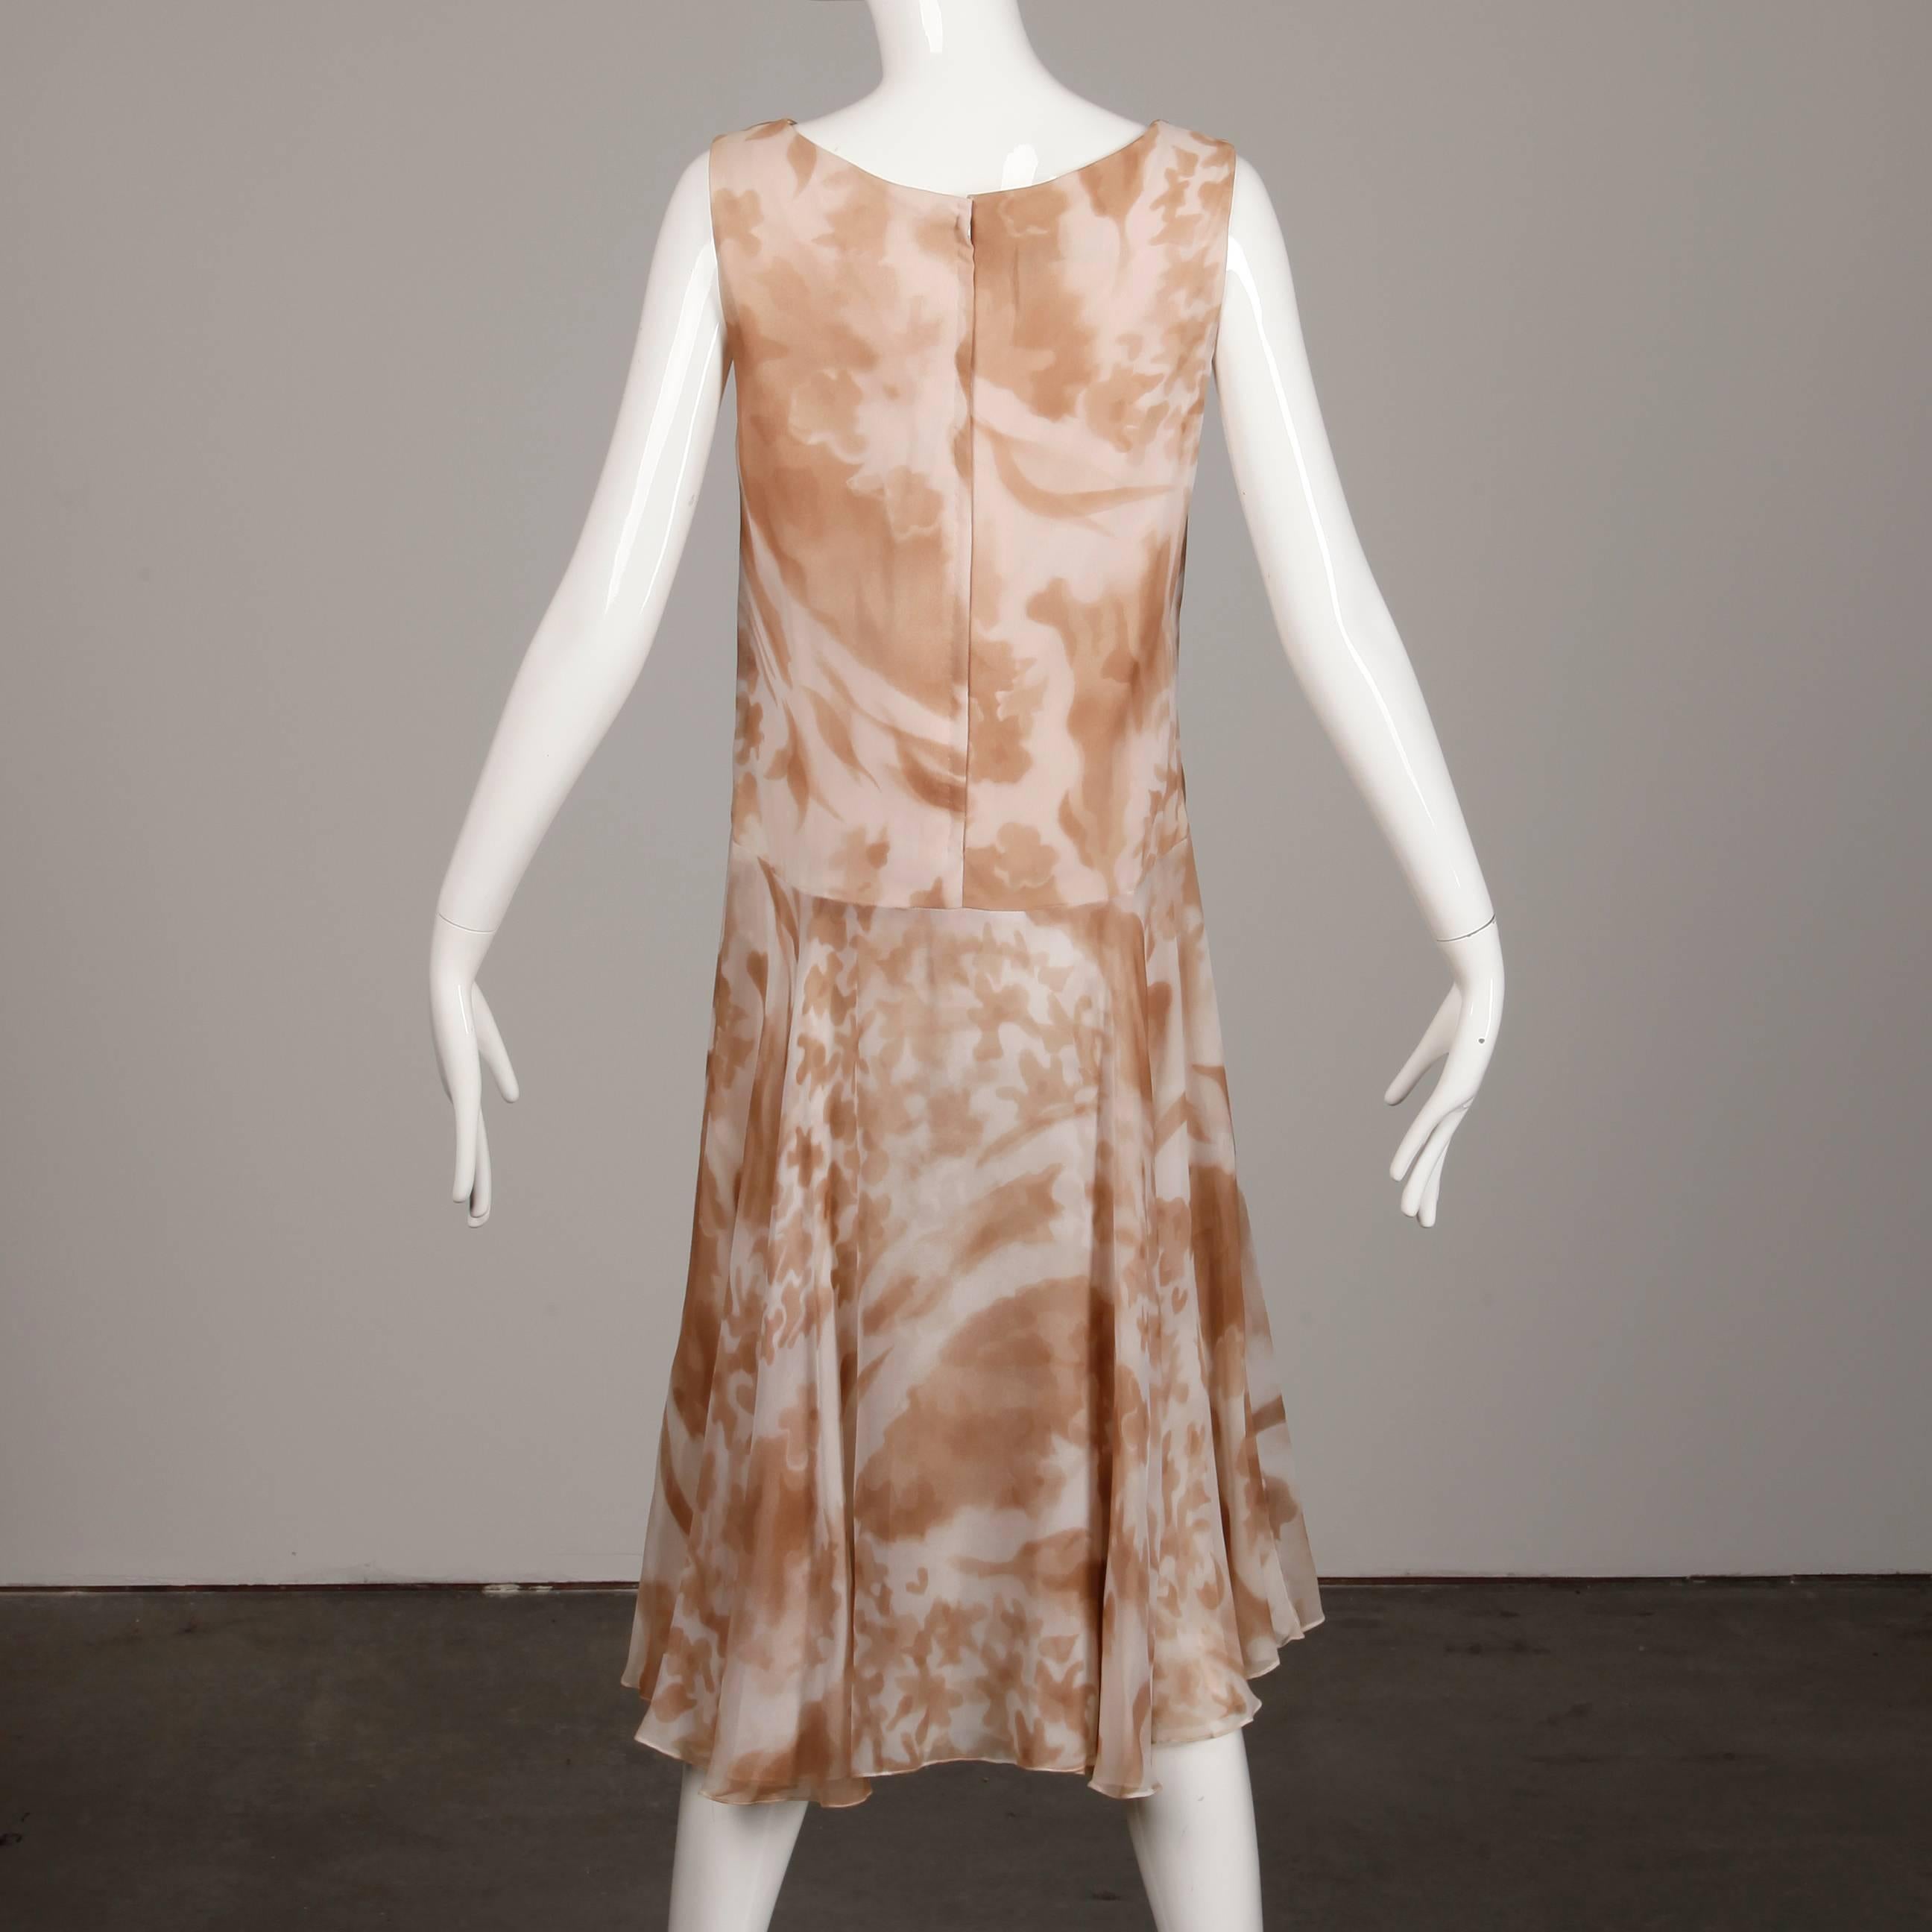 1970s Mr. Blackwell Vintage Sheer Silk Chiffon Print Dress with Detachable Cape For Sale 4